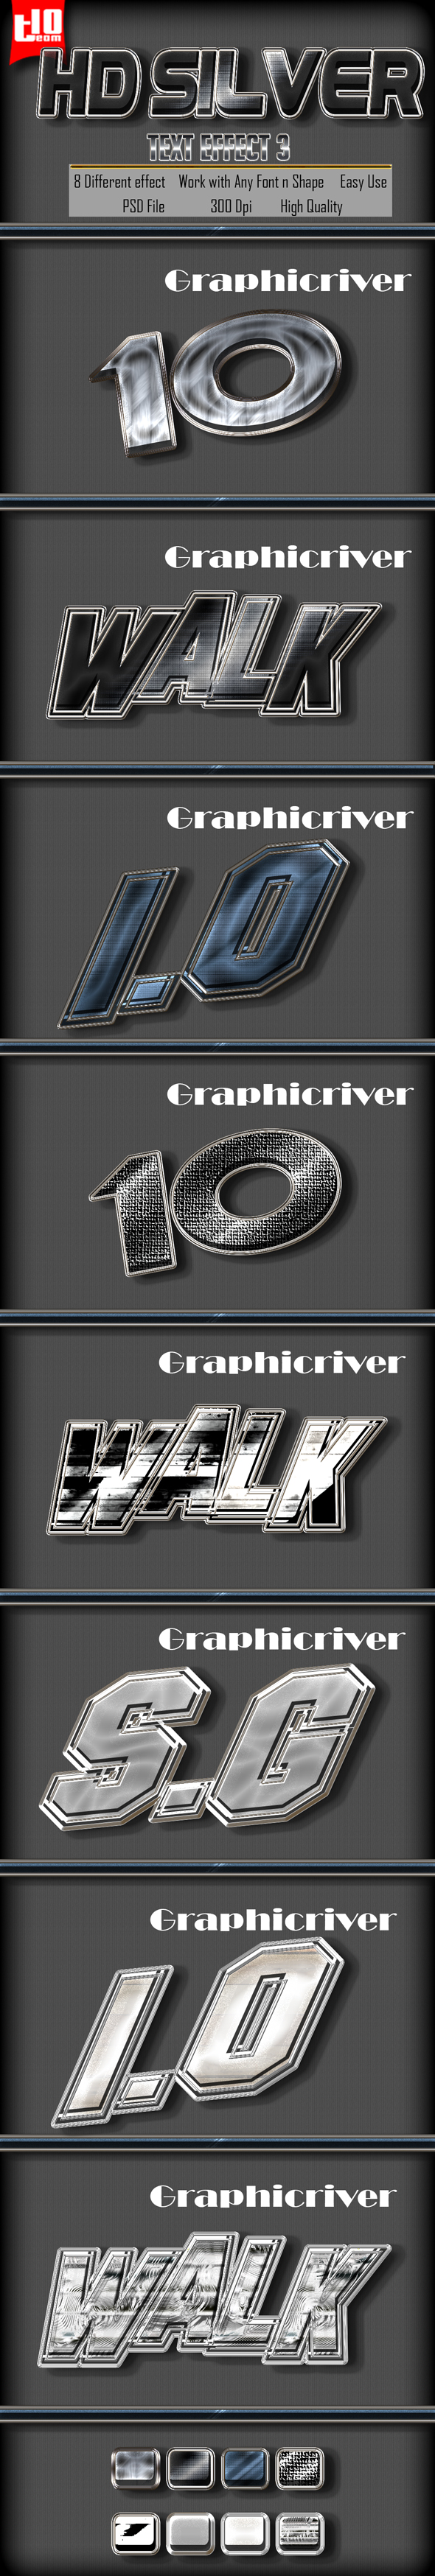 GraphicRiver HD Silver Text Effect 3 20293364